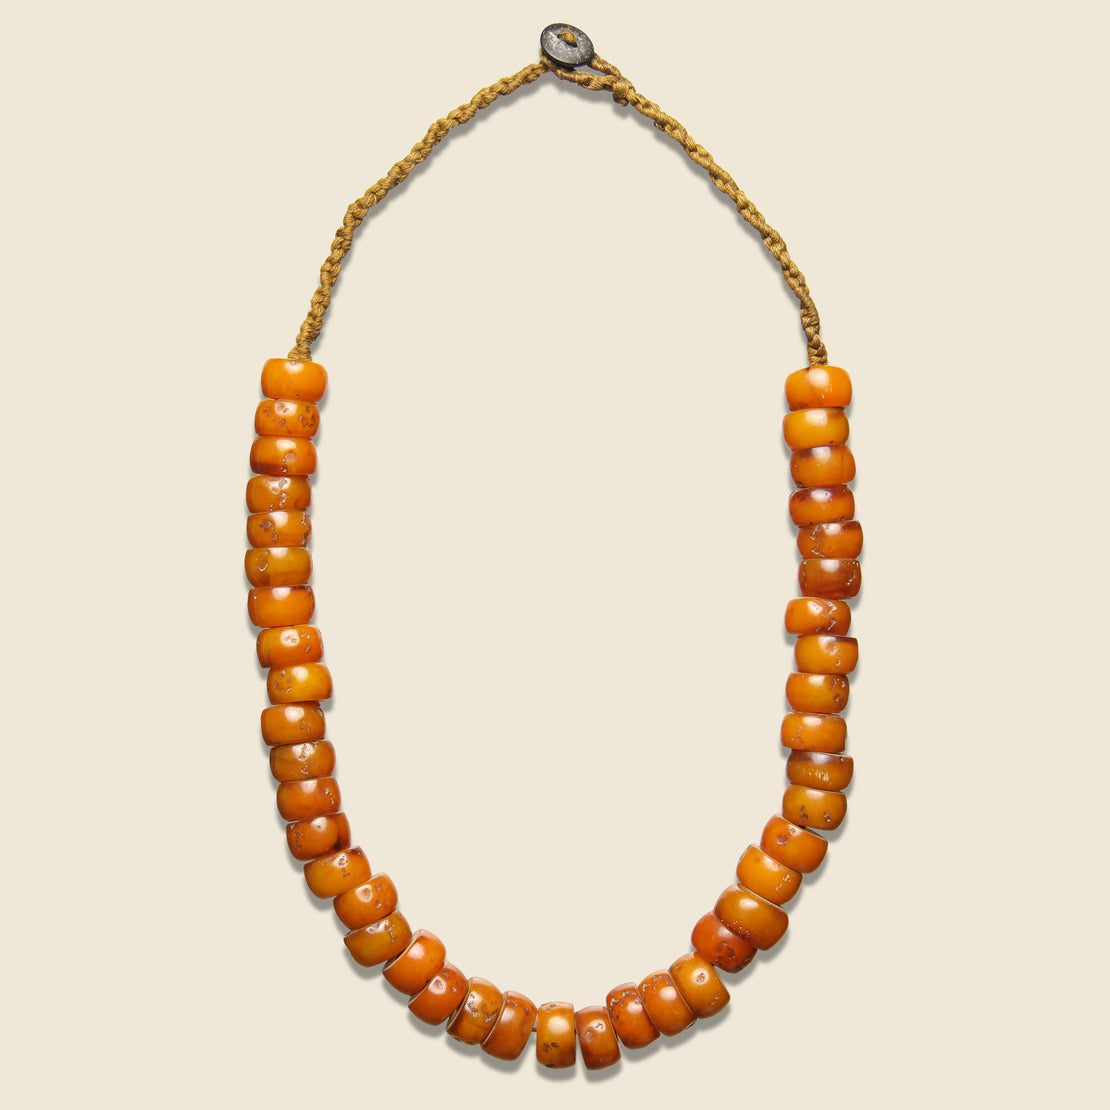 Vintage African Large Amber Bead Necklace